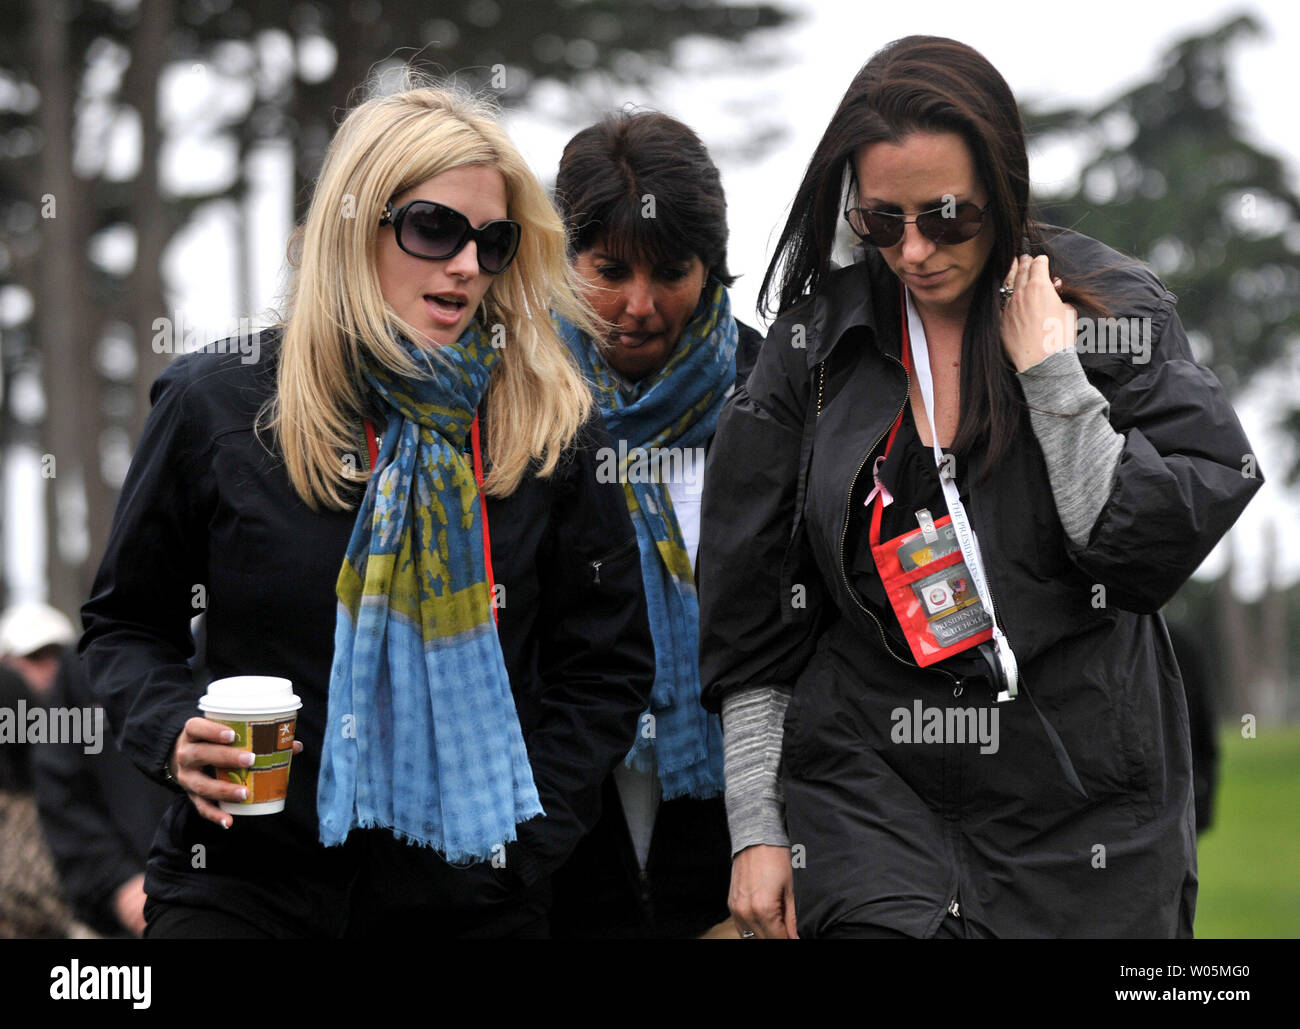 Candice Clark (L), the wife of International team member Tim Clark, walks with other wives during the during the fourth round of The Presidents Cup at Harding Park Golf Course in San Francisco, California on October 10, 2009.    UPI/Kevin Dietsch Stock Photo